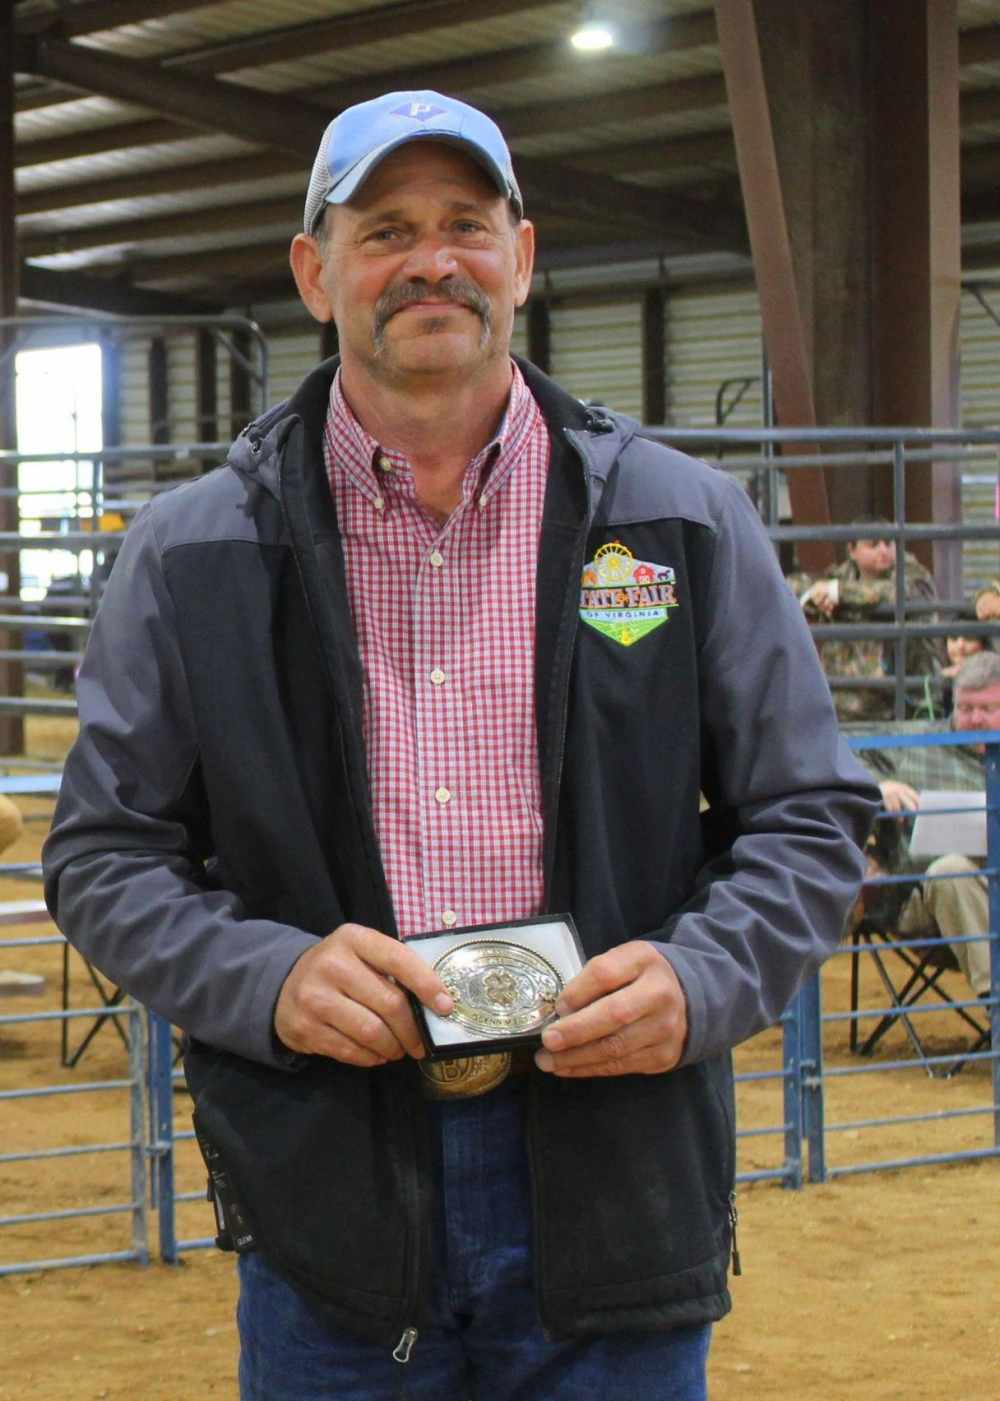  4-H/FFA Fredericksburg Junior Livestock Show and Sale recognized Alpha Gamma Rho Brother Glenn Martin for his contributions to the event.